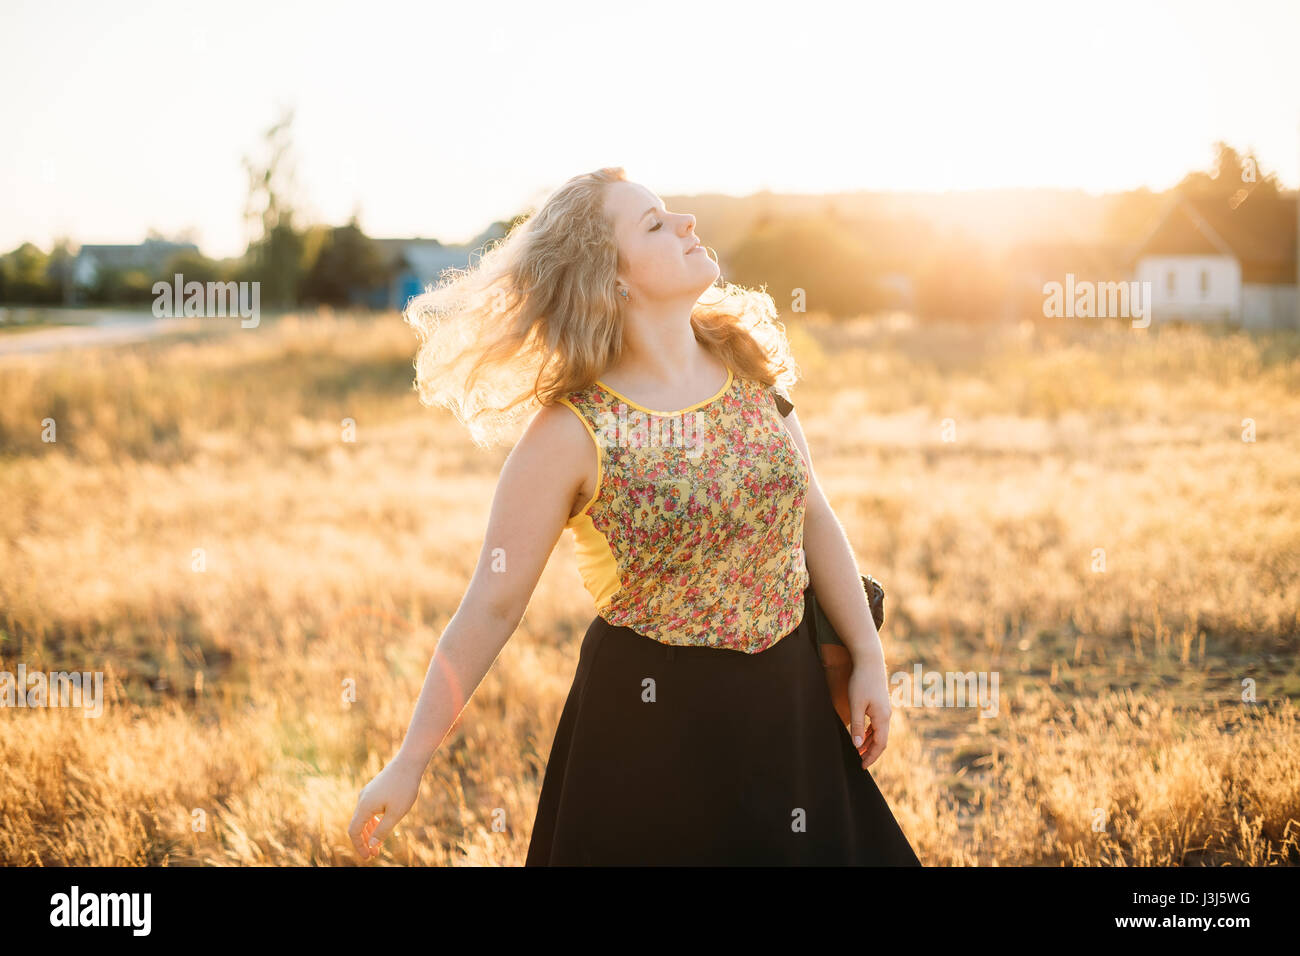 Single Young Pretty Plus Size Caucasian Happy Smiling Laughing Girl Woman Dancing In Summer Meadow. Fun Enjoy Outdoor Summer Nature. Stock Photo